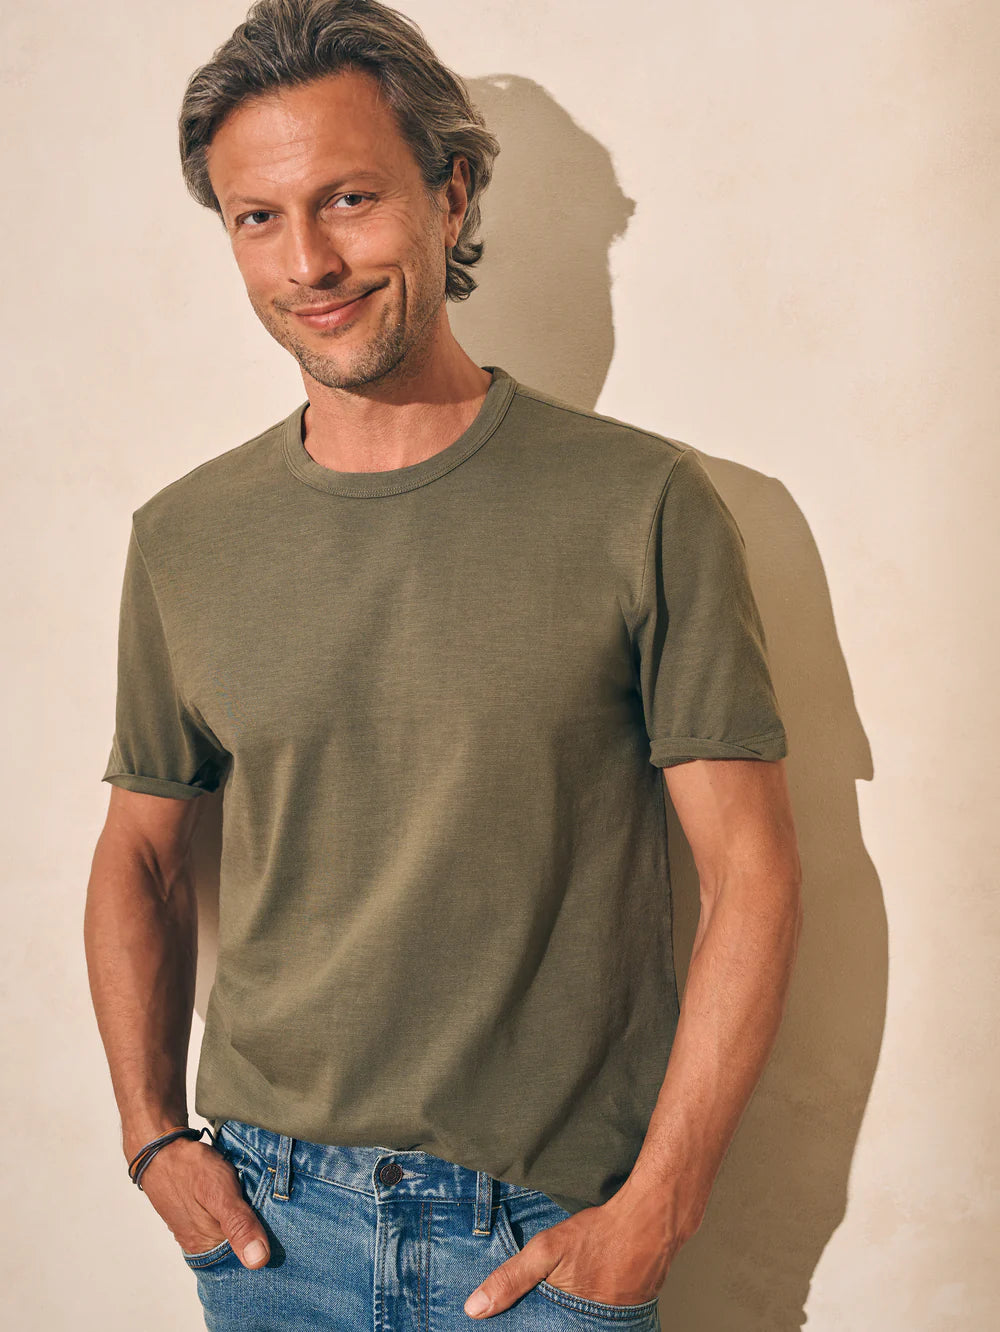 Front view of man wearing an olive green short sleeve t-shirt by Faherty